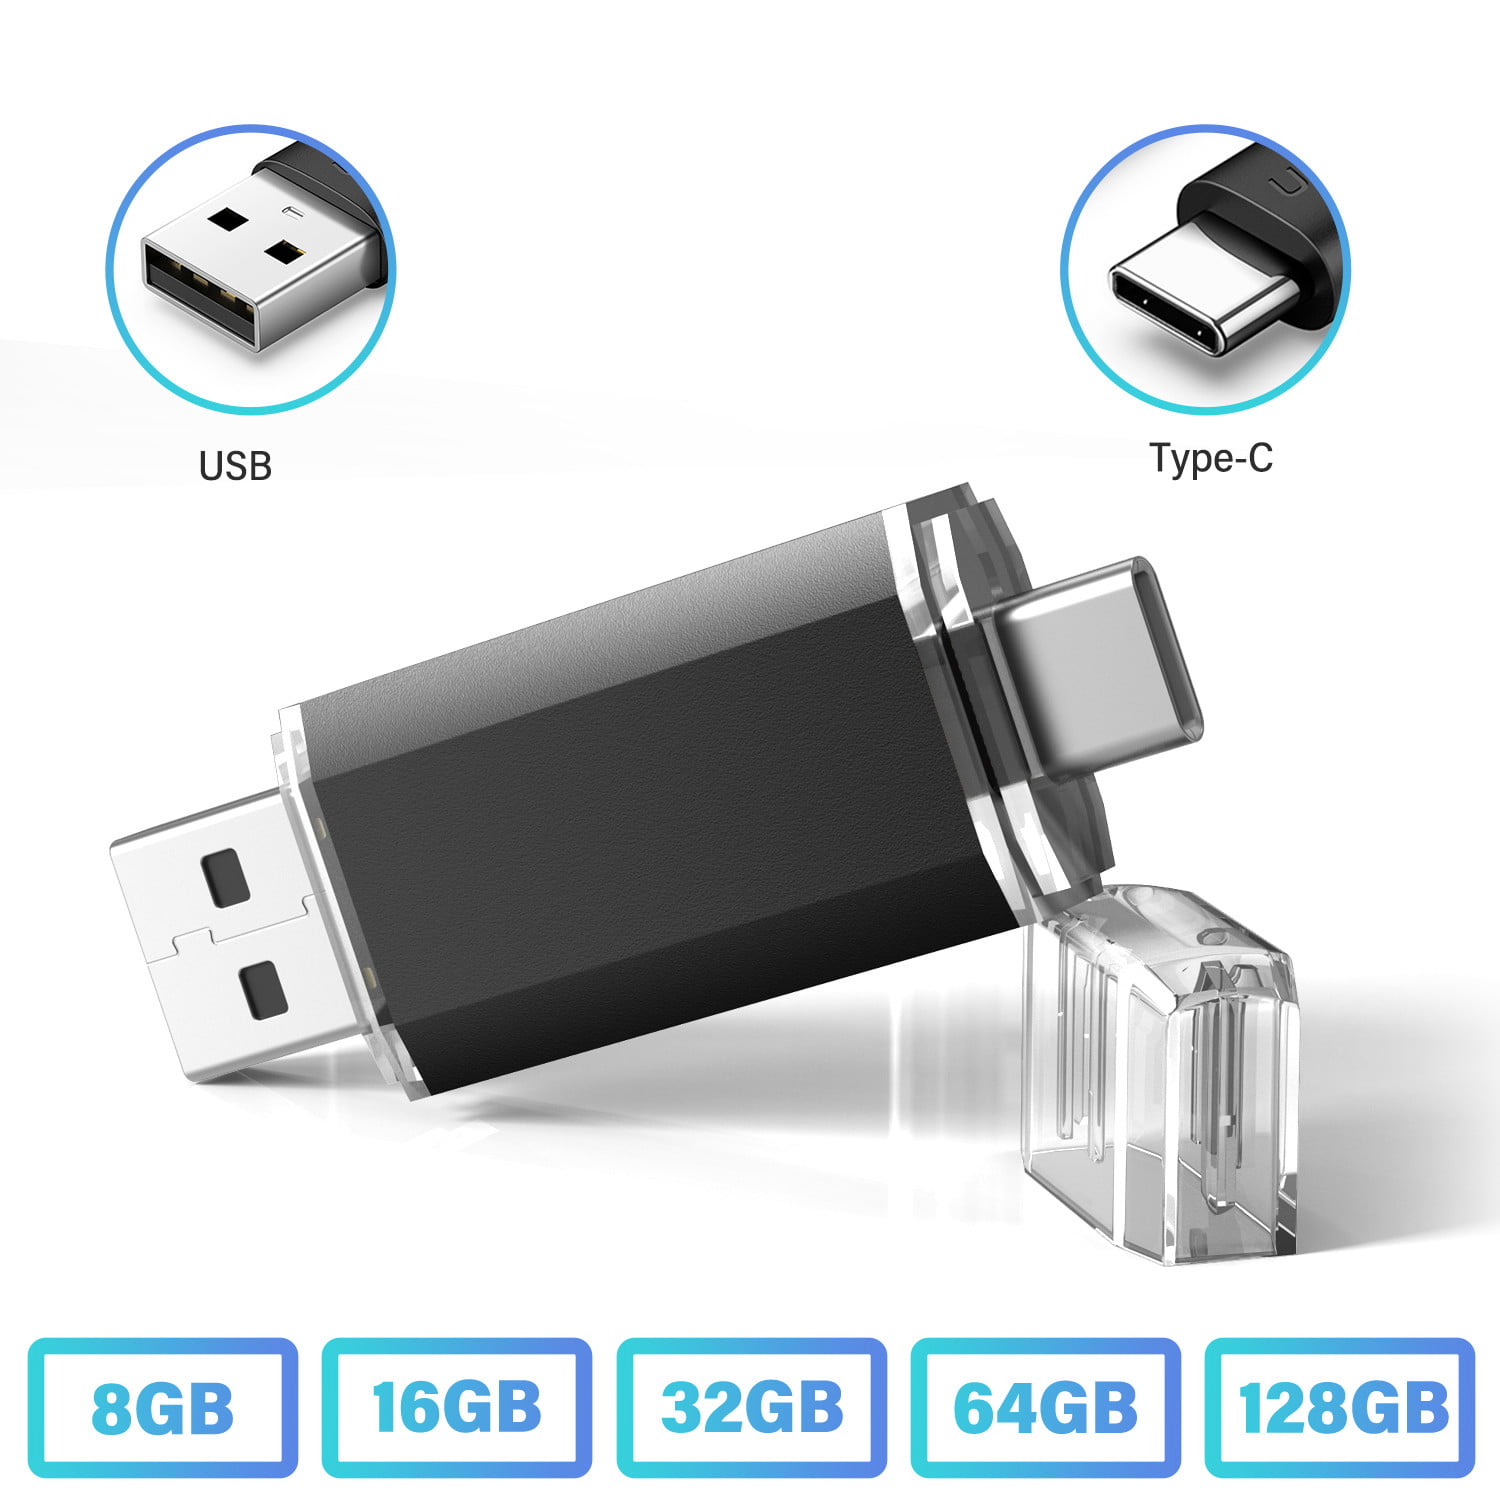 SSK 128GB USB C Flash Drive 150MB/s Transfer Speed Dual Connectors 2 in 1 Type C+USB 3.1 Thumb Jump Drive Memory Stick Thunderbolt 3 Compatible for Android Phone,Macbook/Pro/Air,and more